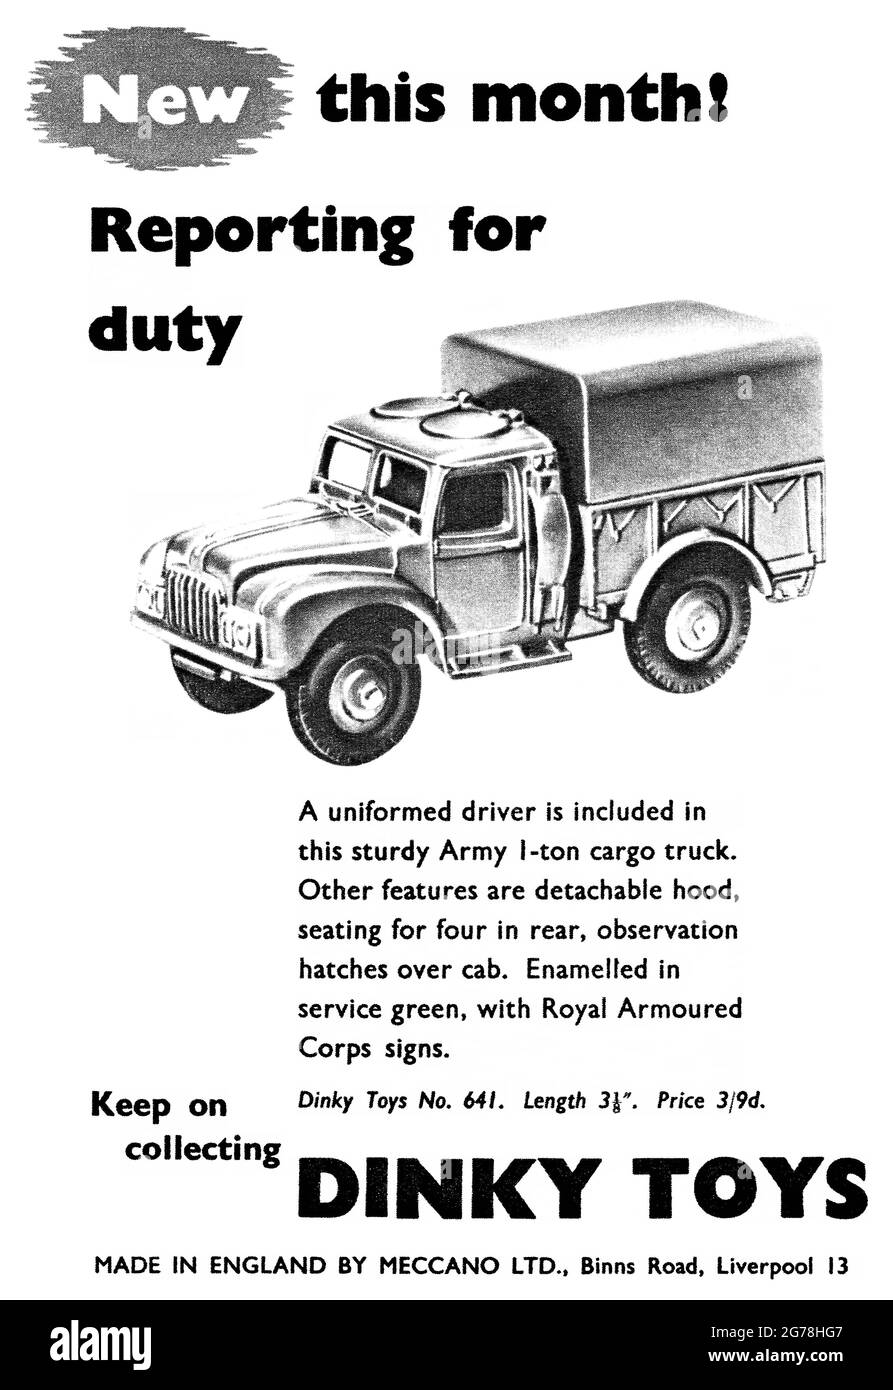 1954 British advertisement for Dinky Toys 1 ton army truck model. Stock Photo